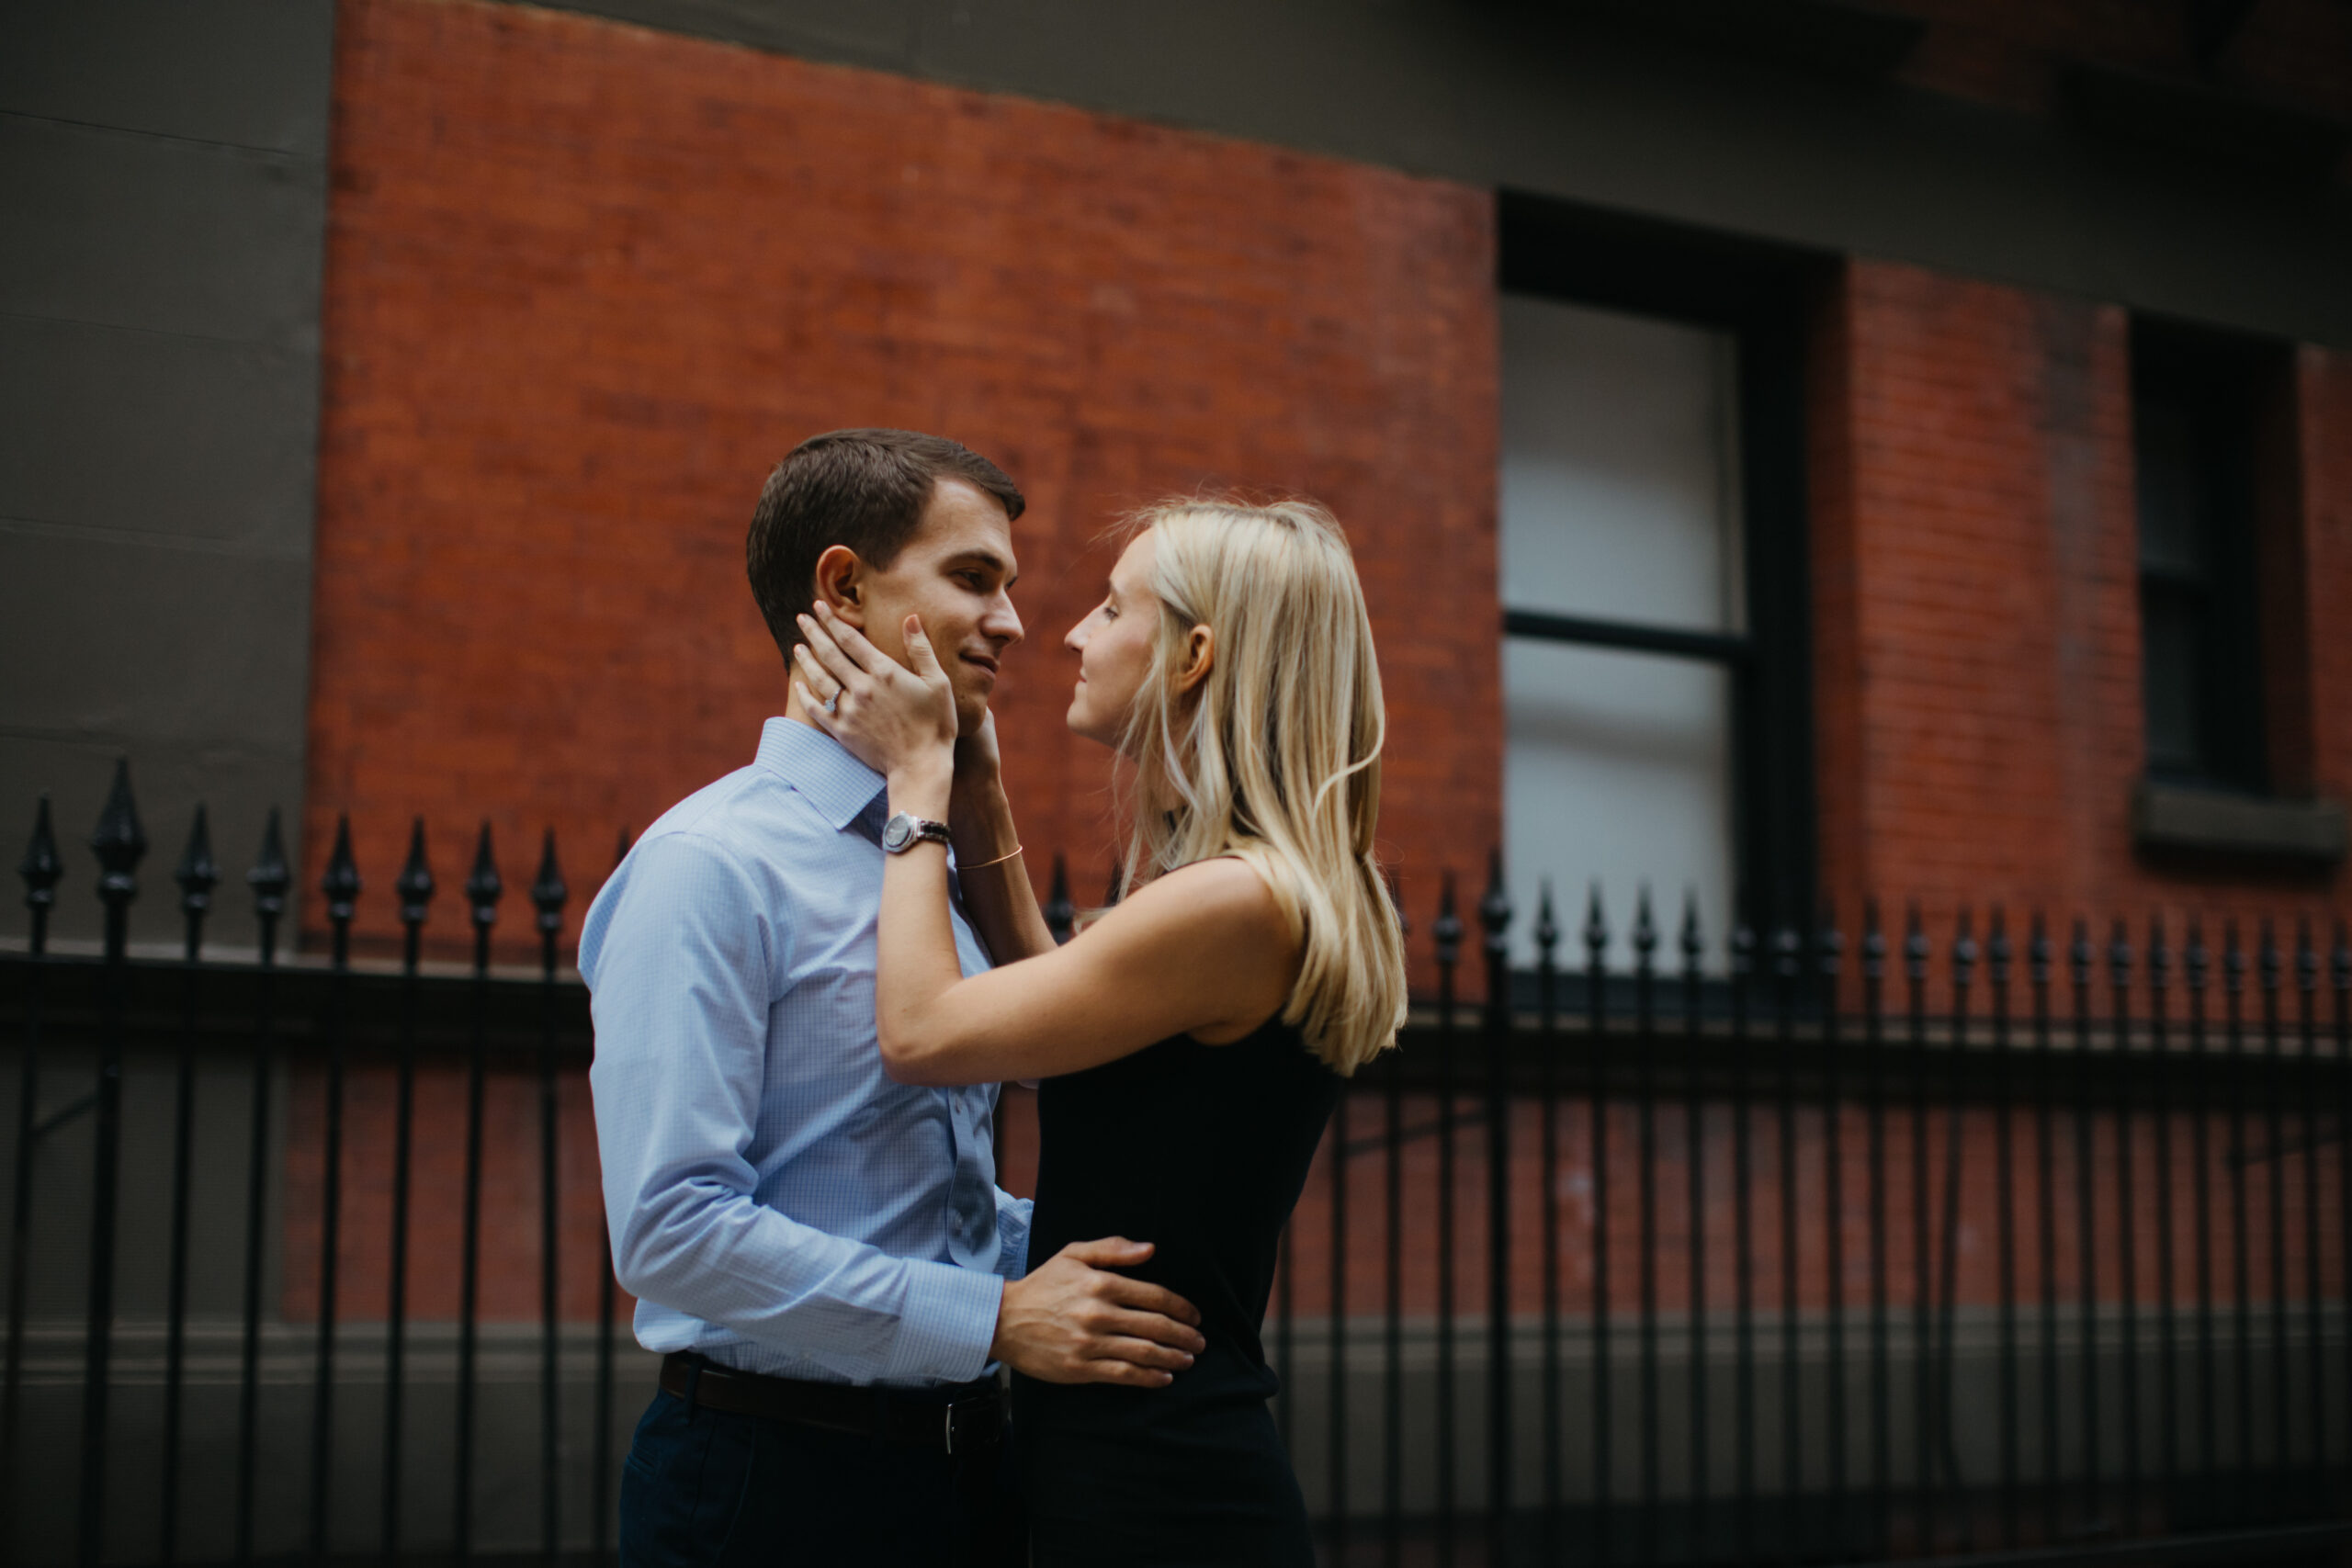 Beautiful couple shares an intimate moment during their West Village New York engagement photo session